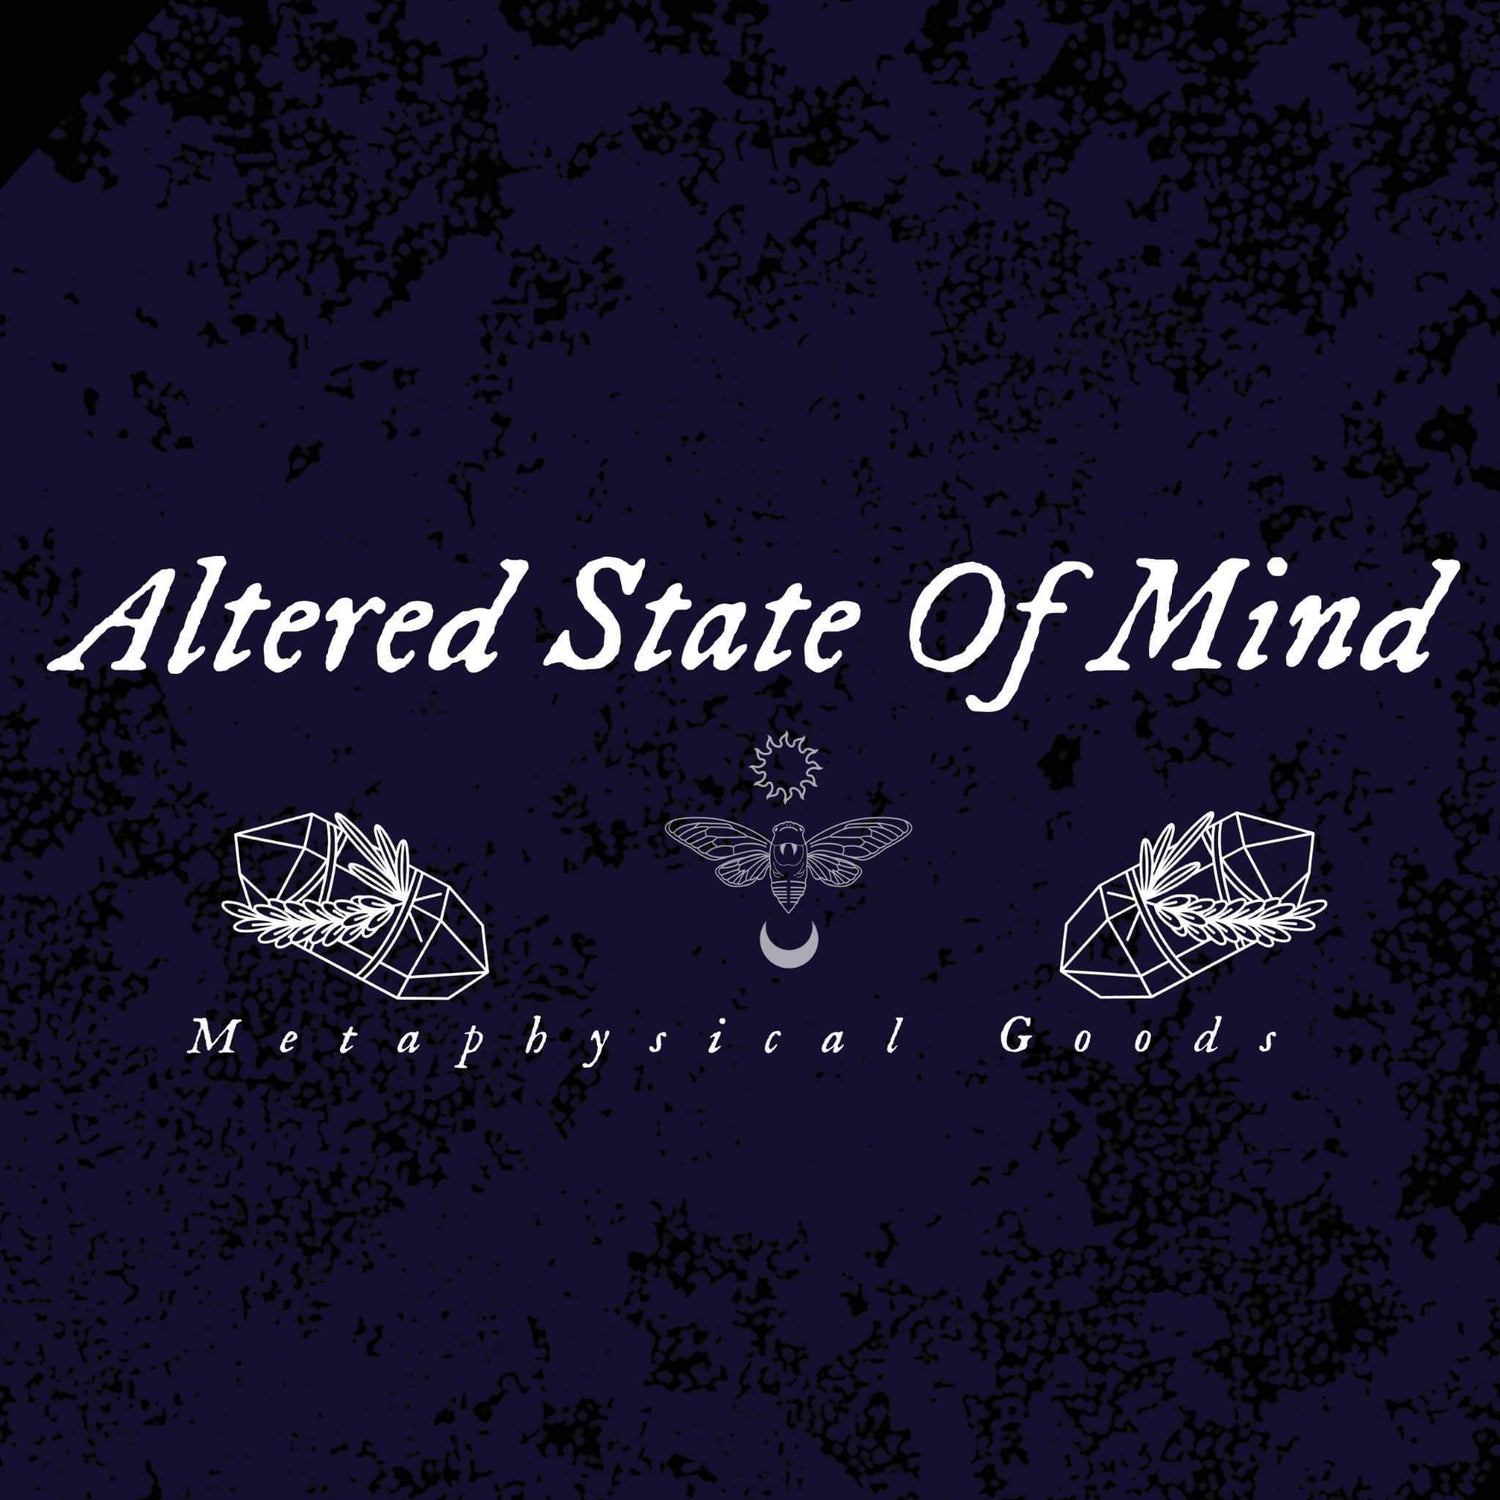 Altered state of mind